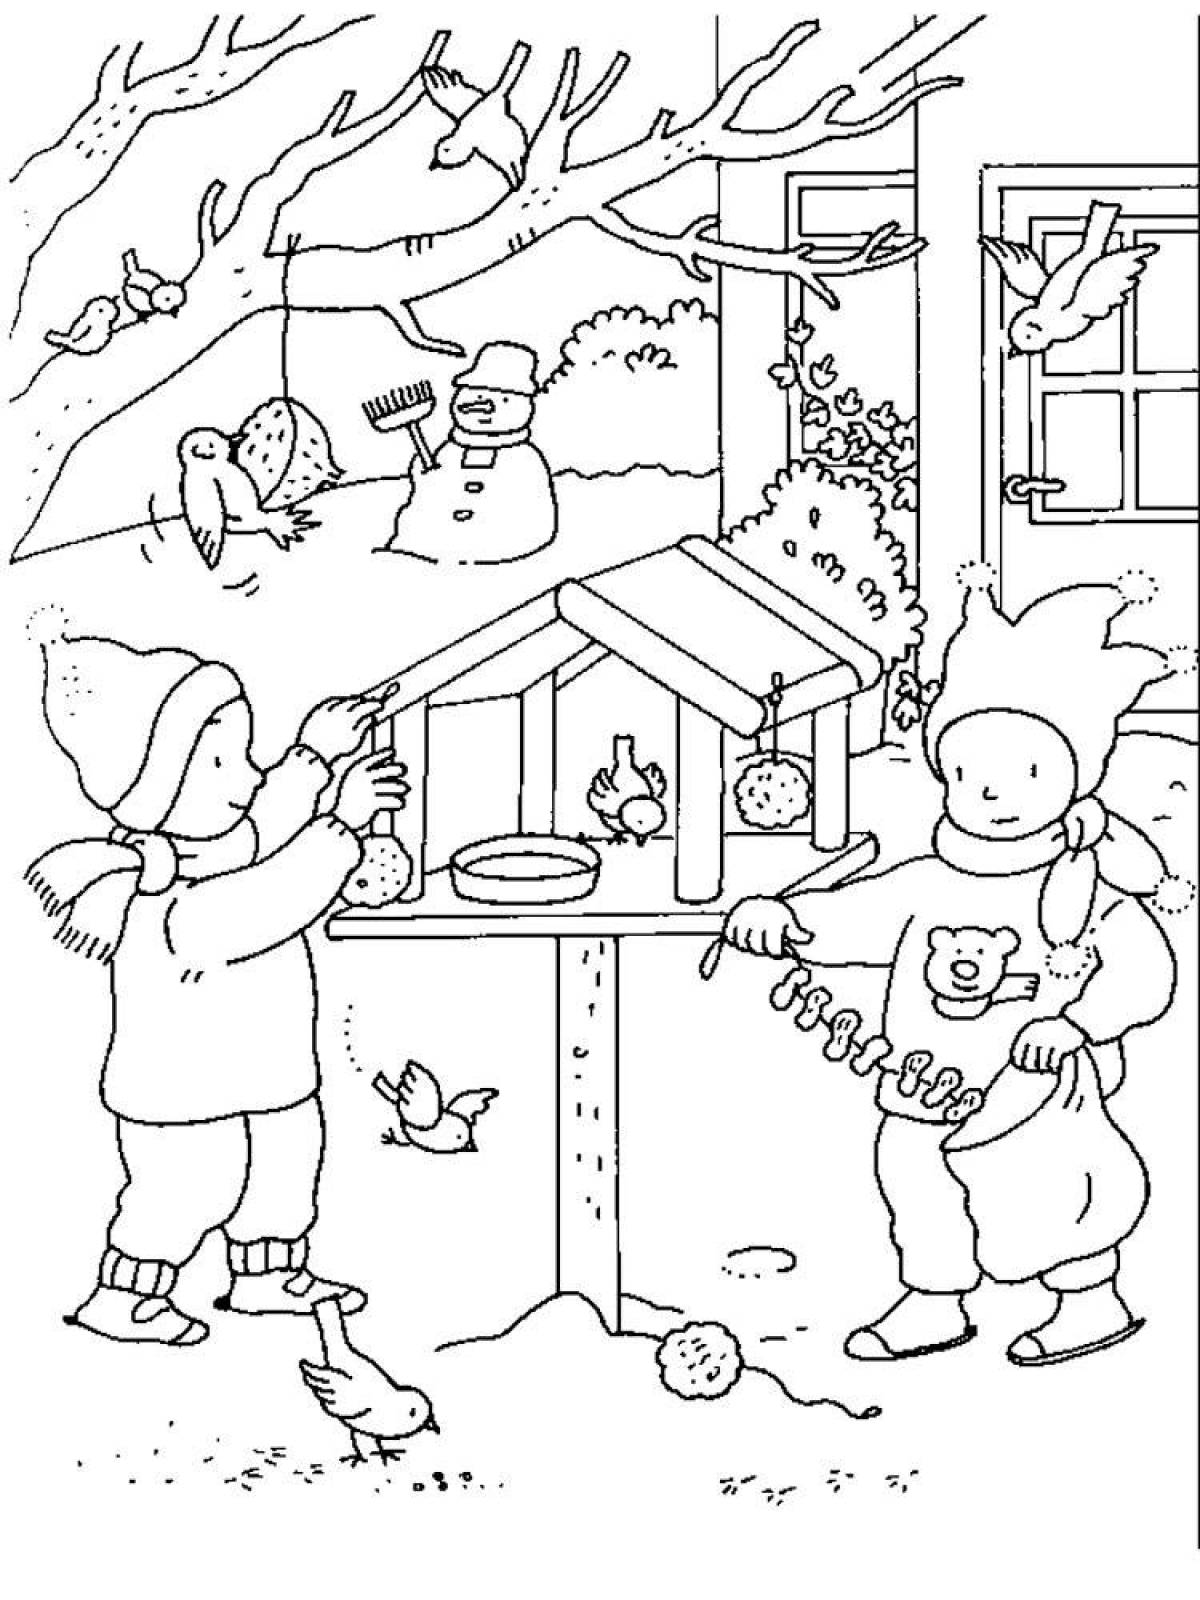 Fairy trough coloring page